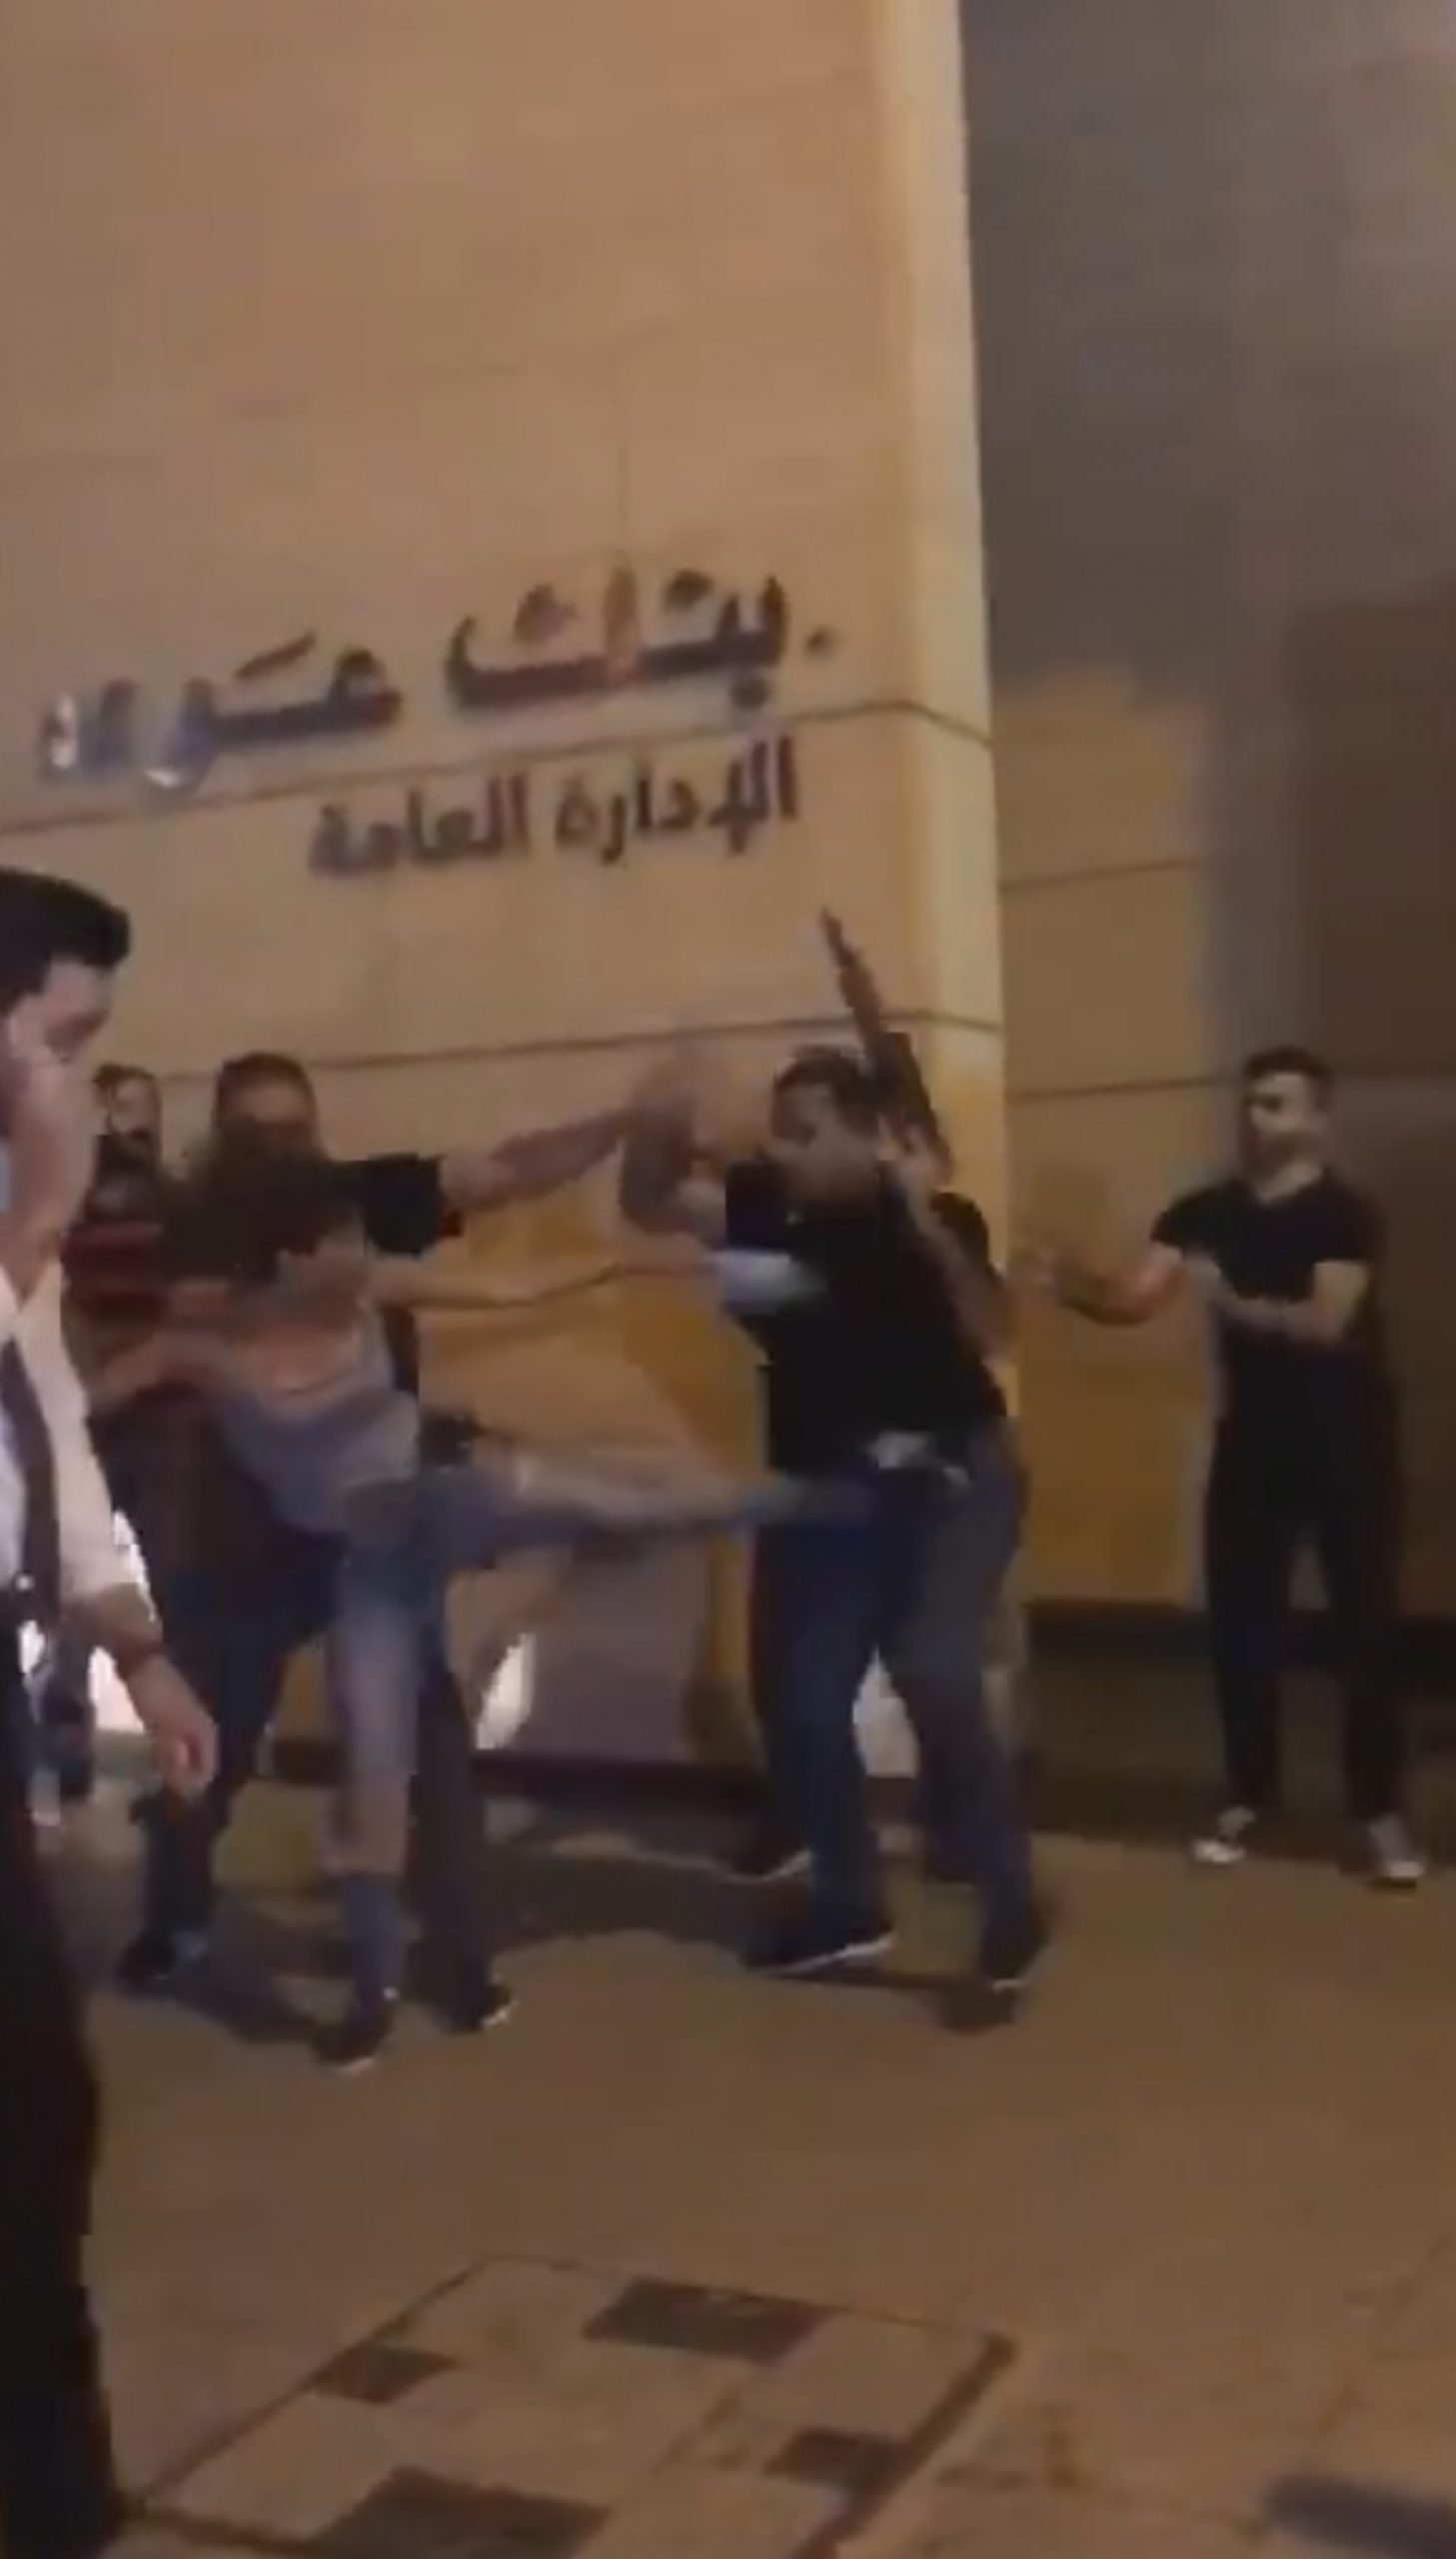 Read more about the article Lebanon Kung-Fu Kick Protester Faces Military Trial